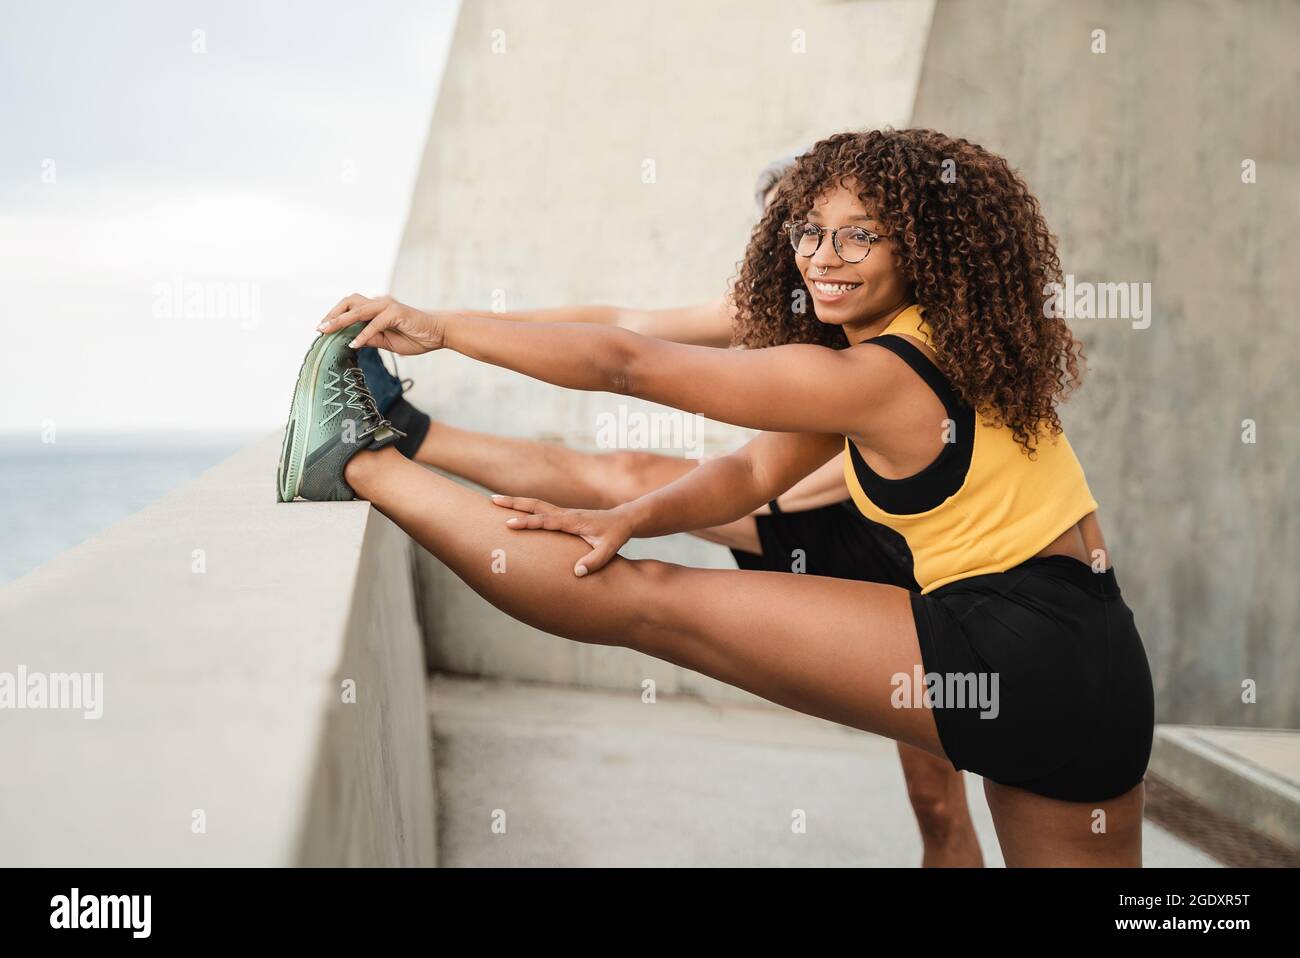 Diverse fit joggers doing workout training routine before running session outdoor at city park - Focus on african american girl face Stock Photo